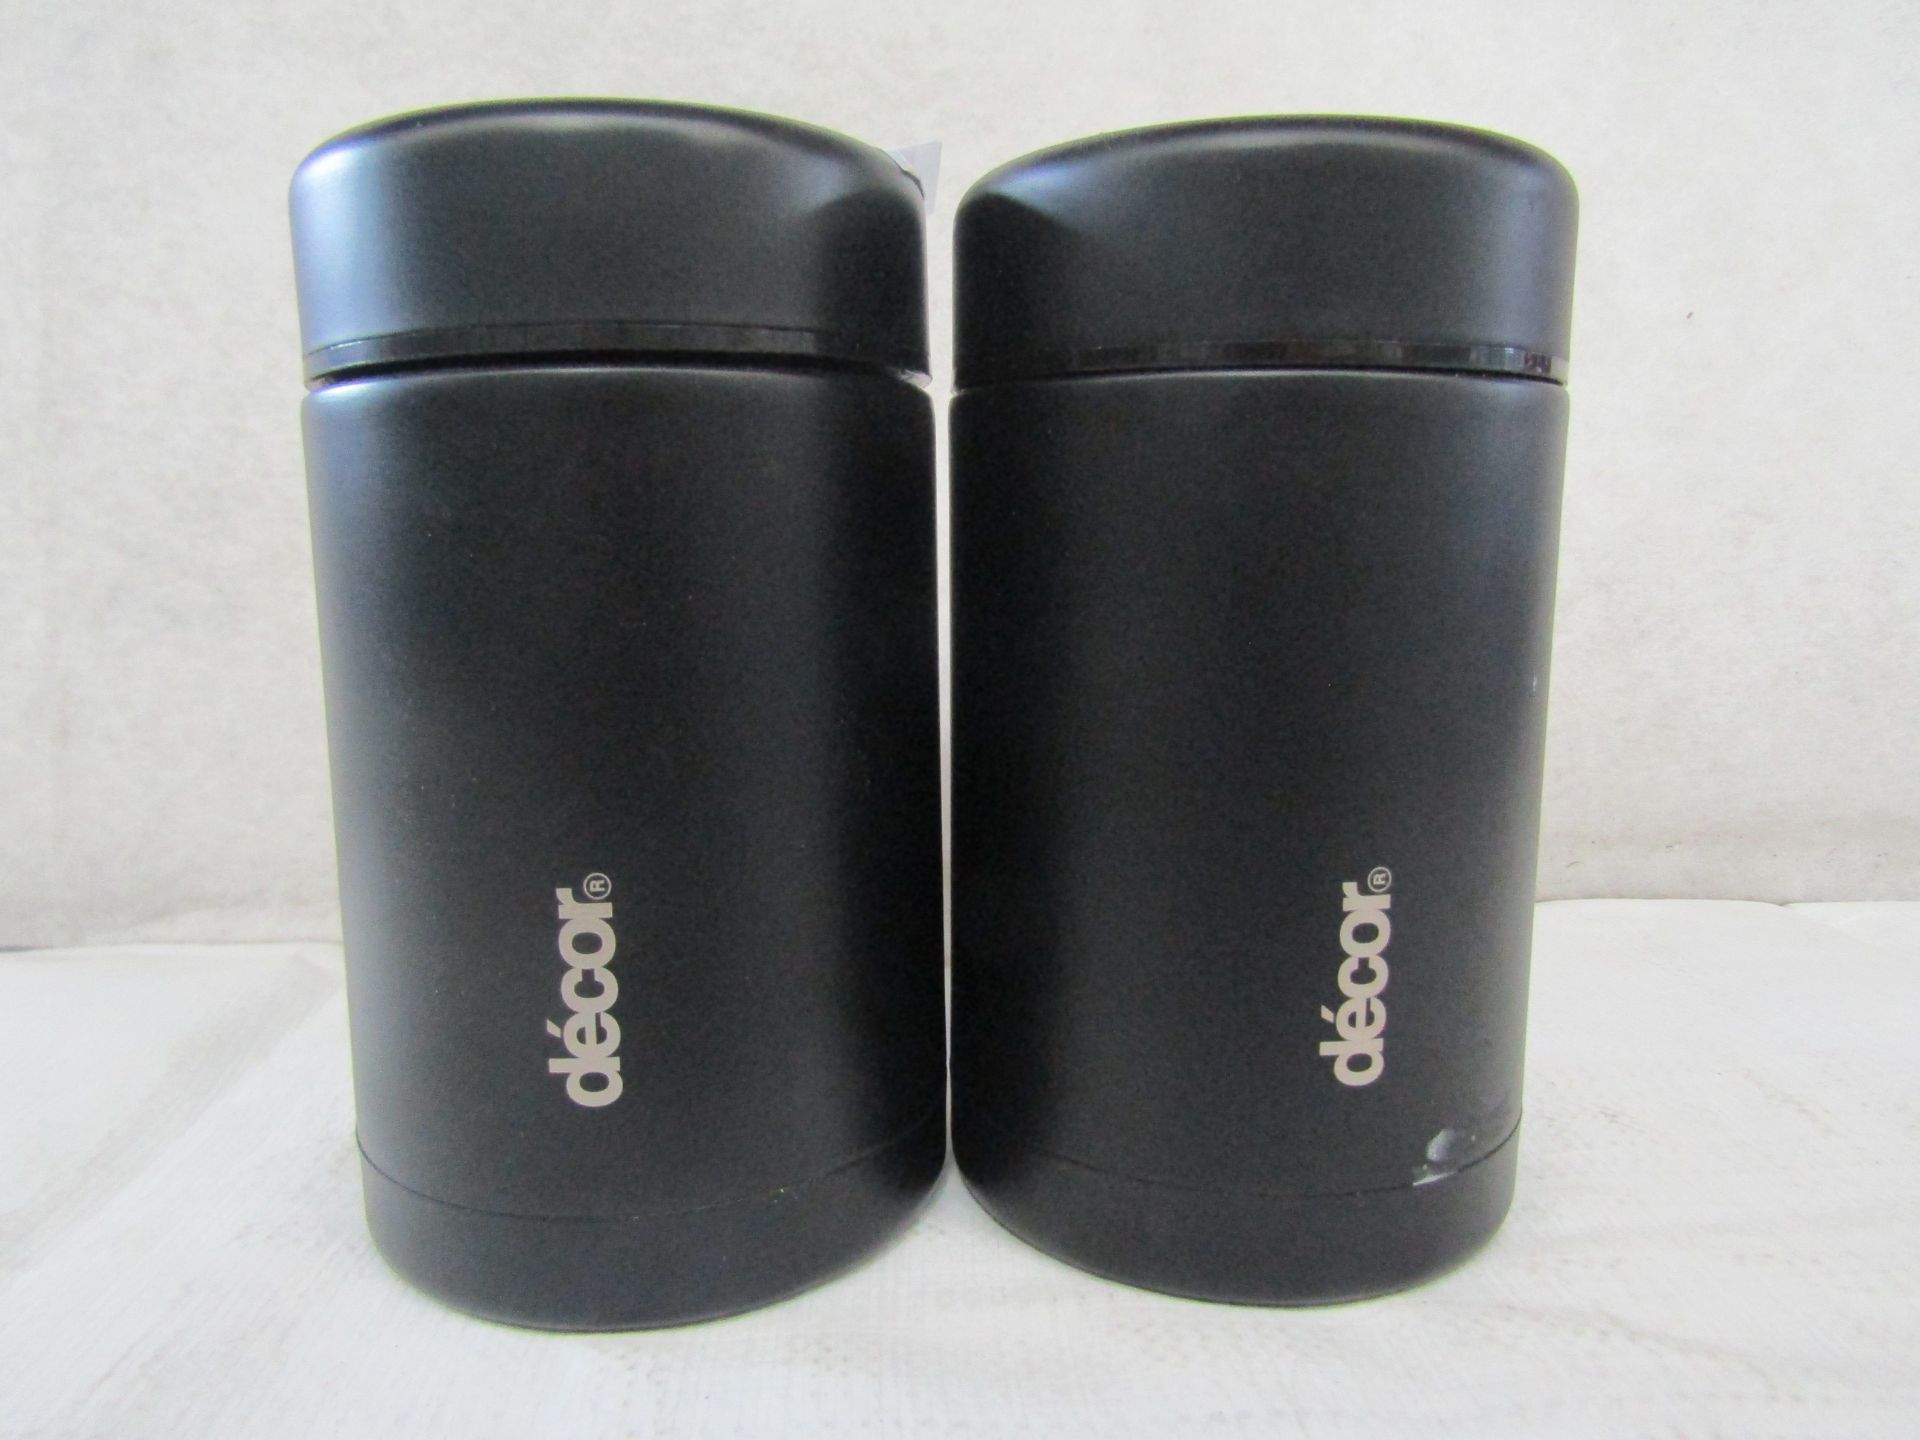 2x D‚cor - Stainless Steel Black Food Flask / 520ml - Good Condition & No Packaging.